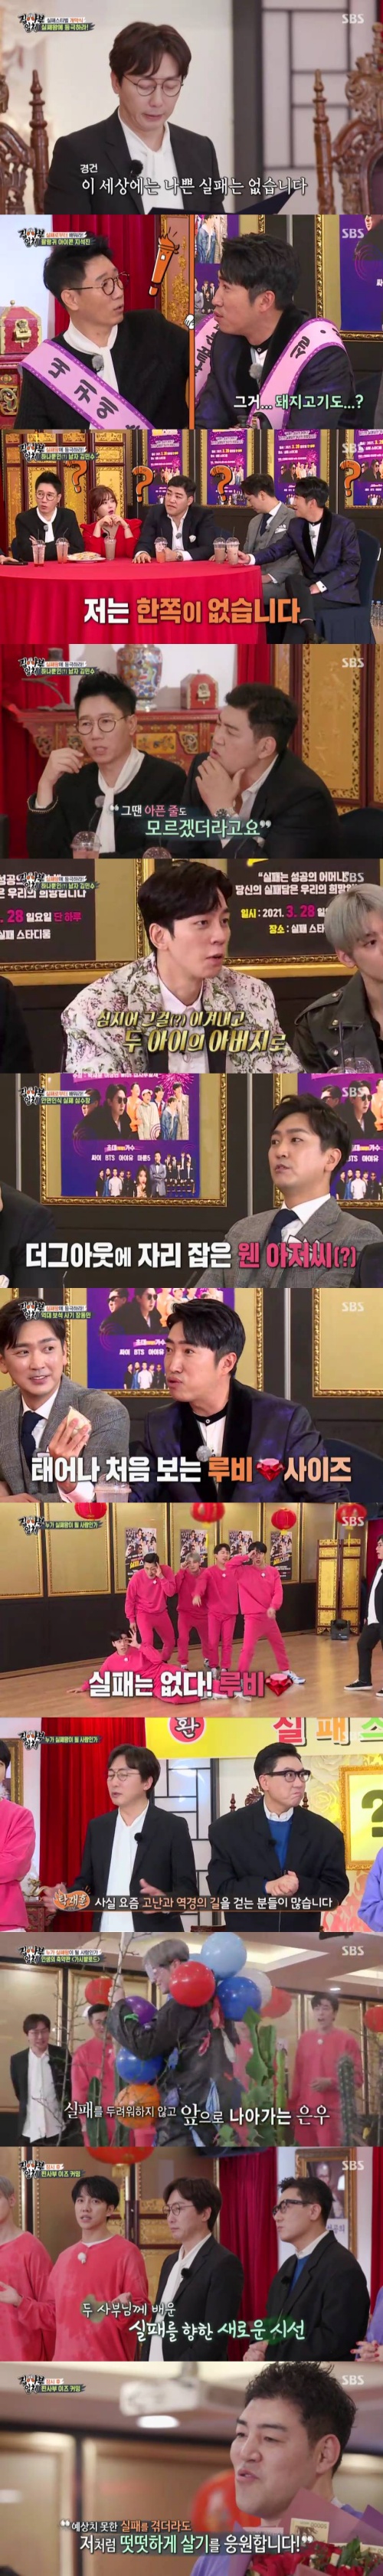 SBS All The Butlers took the best one minute by raising expectations just by the appearance of entertainment The Godfather Lee Kyung-kyu.According to Nielsen Korea, a TV viewer rating agency, SBS All The Butlers TV viewer ratings in the metropolitan area recorded 5.5% in the first part and 6.5% in the second part, 2.9% in the topic and competitiveness index, and 8.2% in the highest TV viewer ratings per minute.On the day of the show, the long-awaited Failure Stival scene with Master Tak Jae-hun, Lee Sang-min, Failure Star Ji Suk-jin, Shim Soo-chang, Kim Min-soo, Jang Dong-min and Solbi was released.First, Tak Jae-hun said, There is no bad Failure in this world.Failure is part of the success, he said. The purpose of the Failure Festival is to come out of Failures experience and support Failure stars re-Top Model. Lee Sang-min said, I hope we will be a big cheer for the tired people.In addition, the King Failure, who gives strength to the tired Failure people, was given a subsidy of 1 million won to burn the Failure stars.Failure stars have been laughing at the extraordinary Failure story, such as the investment Failure and the billion-dollar jewel fraud that have been going through.In particular, Kim Min-soo shocked Failure stars by saying that he lost one testicle during the martial arts Kyonggi.Kim Min-soo said, I was hit by the opponents kick in the second round, but the plastic foul cup, which is a players protective tool, was broken.Then he was hit very strongly in the fourth round. I wanted something to be wrong.Nevertheless, Kim Min-soo said he took a three-minute break and continued Kyonggi.Kim Min-soo said, I did not even know it was sick at the time. The members admired that it is a great thing to play Kyonggi again when it is a pain that can not be imagined.Even Kim Min-soo was cheered by everyone who said he won the Kyonggi that day.Kim Min-soo, who went to the hospital in an ambulance, applauded the story that he had undergone surgery to remove the blood from his legs, saying, I have survived and become a father of two children.Also on this day, All The Butlers Lee Seung-gi, Yang Se-hyeong, Shin Sung-rok, Jung Eun-woo, Kim Dong-hyun and Failure Star Ji Suk-jin, Shim Soo-chang, Kim Min-soo, Jang Dong-min and Solbi are Tak Jae-hun and Lee Sang Top Model on the extraordinary game - prepared by MinThere are many people who walk the path of hardship and adversity these days.I prepared for the life like Innocent Thing Field Road, the intention of walking the road together to the end. He introduced Innocent Thing Field Road Game.This is the victory of a team that blows more balloons as it passes through the Innocent Thing Field. Lee Sang-min added, It is only when we taste a lot of Failure, endure the trials and finally get out that success is in front of us.I will go without giving up on any Innocent Thing field in front of me, said Jung Eun-woo, who became the Top Model.Thanks to the support of the members, Jung Eun-woo passed through the Innocent Thing Field safely and left 11 balloons, but Kim Min-soo left 15 balloons and the Failure Star team won.Since then, the group Game In the Well has been conducted, and Kim Min-soo has won the final result of Failure King.Kim Min-soo said, I hope I will live like a man like me even if I have an unexpected failure.On the other hand, at the end of the broadcast, members gathered in the mountain of Inje, Gangwon Province were revealed.Is not it a natural master? In front of the members who wondered about the identity of the master, someone who said that he was a master of the master appeared.As he was leading the members to the place where Master is, he explained to Master, Master had a rich movie and honor that was unrivaled when he was in the city, but he entered the school a month ago, saying, I will leave the world before the world abandons me.At the end of the mountain trail along the school, I saw the back of the Master, who was in the valley with a questionable purple dress.The members said, Are you old? And Are you doing that all day? Yang Se-hyeong said, It is only a month old, but it is a geek.The identity of the Master was the entertainment The Godfather Lee Kyung-kyu.Lee Kyung-kyu said, I invited him to this deep mountain to tell me how to live for 10 years in the entertainment industry. He laughed, saying, I eat it day by day for the next 10 years.The scene in which Lee Kyung-kyu appeared in front of the members in the same way as Doin on the day raised expectations and won the best one minute with 8.2% of TV viewer ratings per minute.SBS